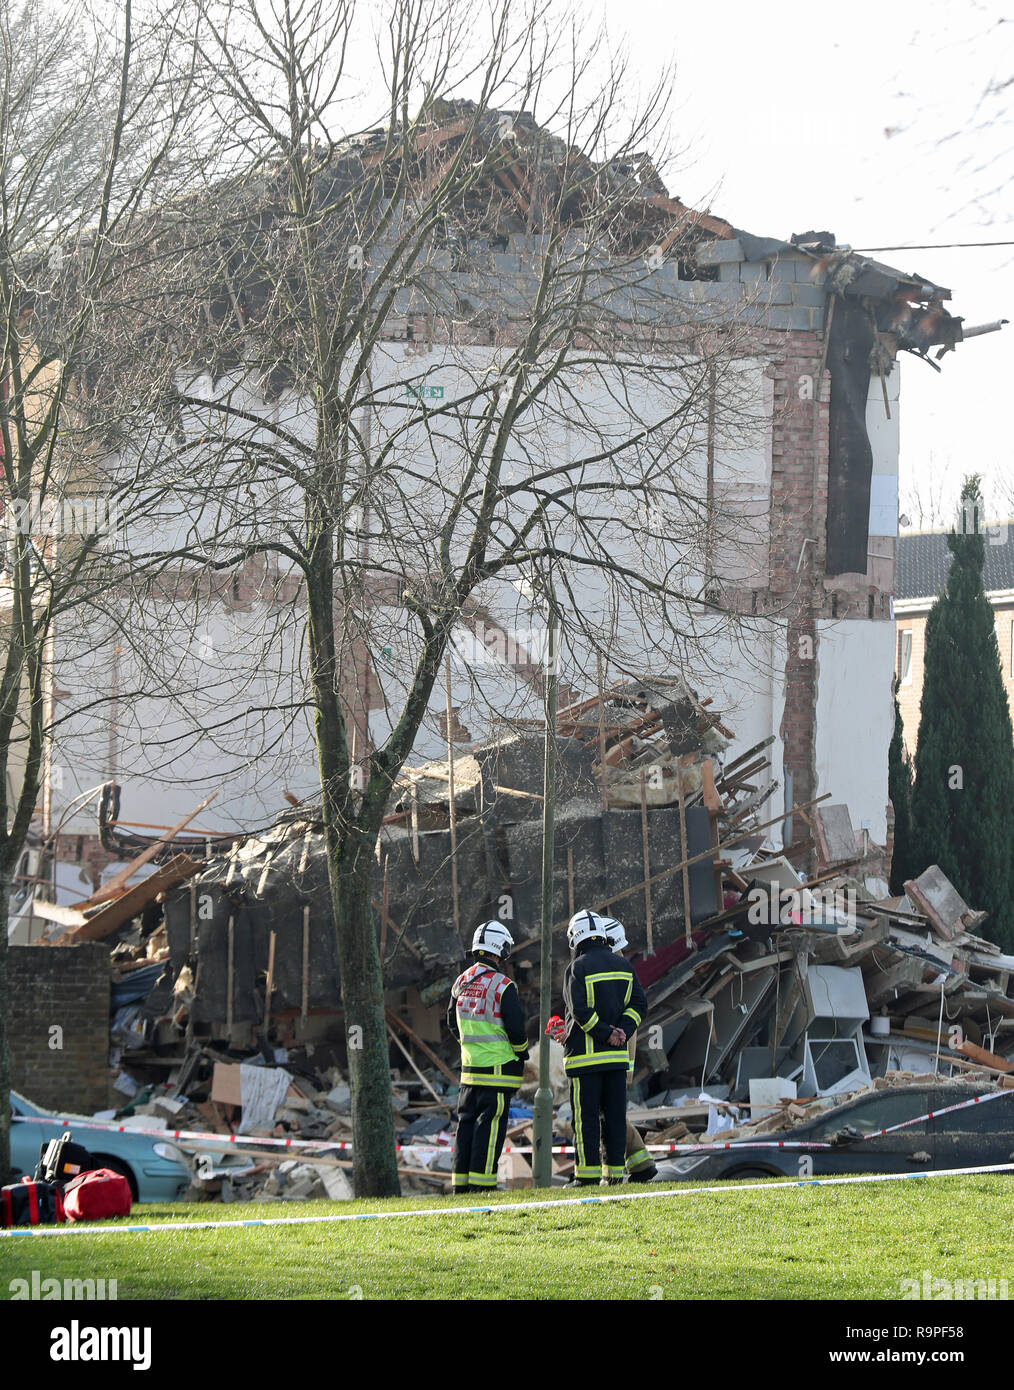 Emergency service personnel in Launcelot Close, Andover, where Hampshire Police say that the body of a man has been found after an explosion caused a building to collapse this morning. Stock Photo